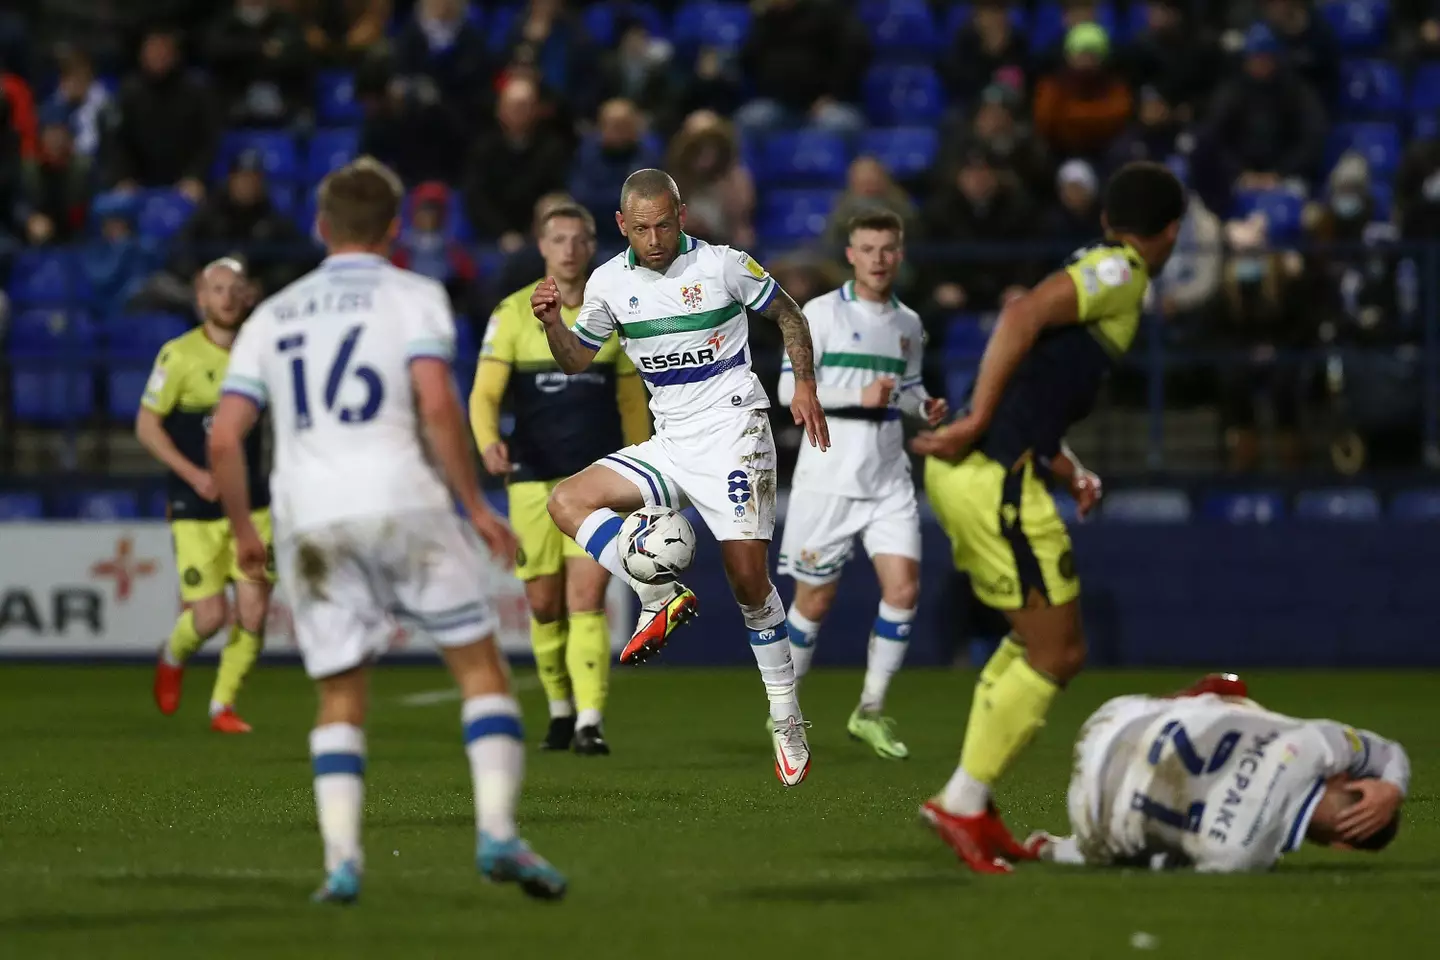 Jay Spearing in action for Tranmere Rovers back in February. (Image